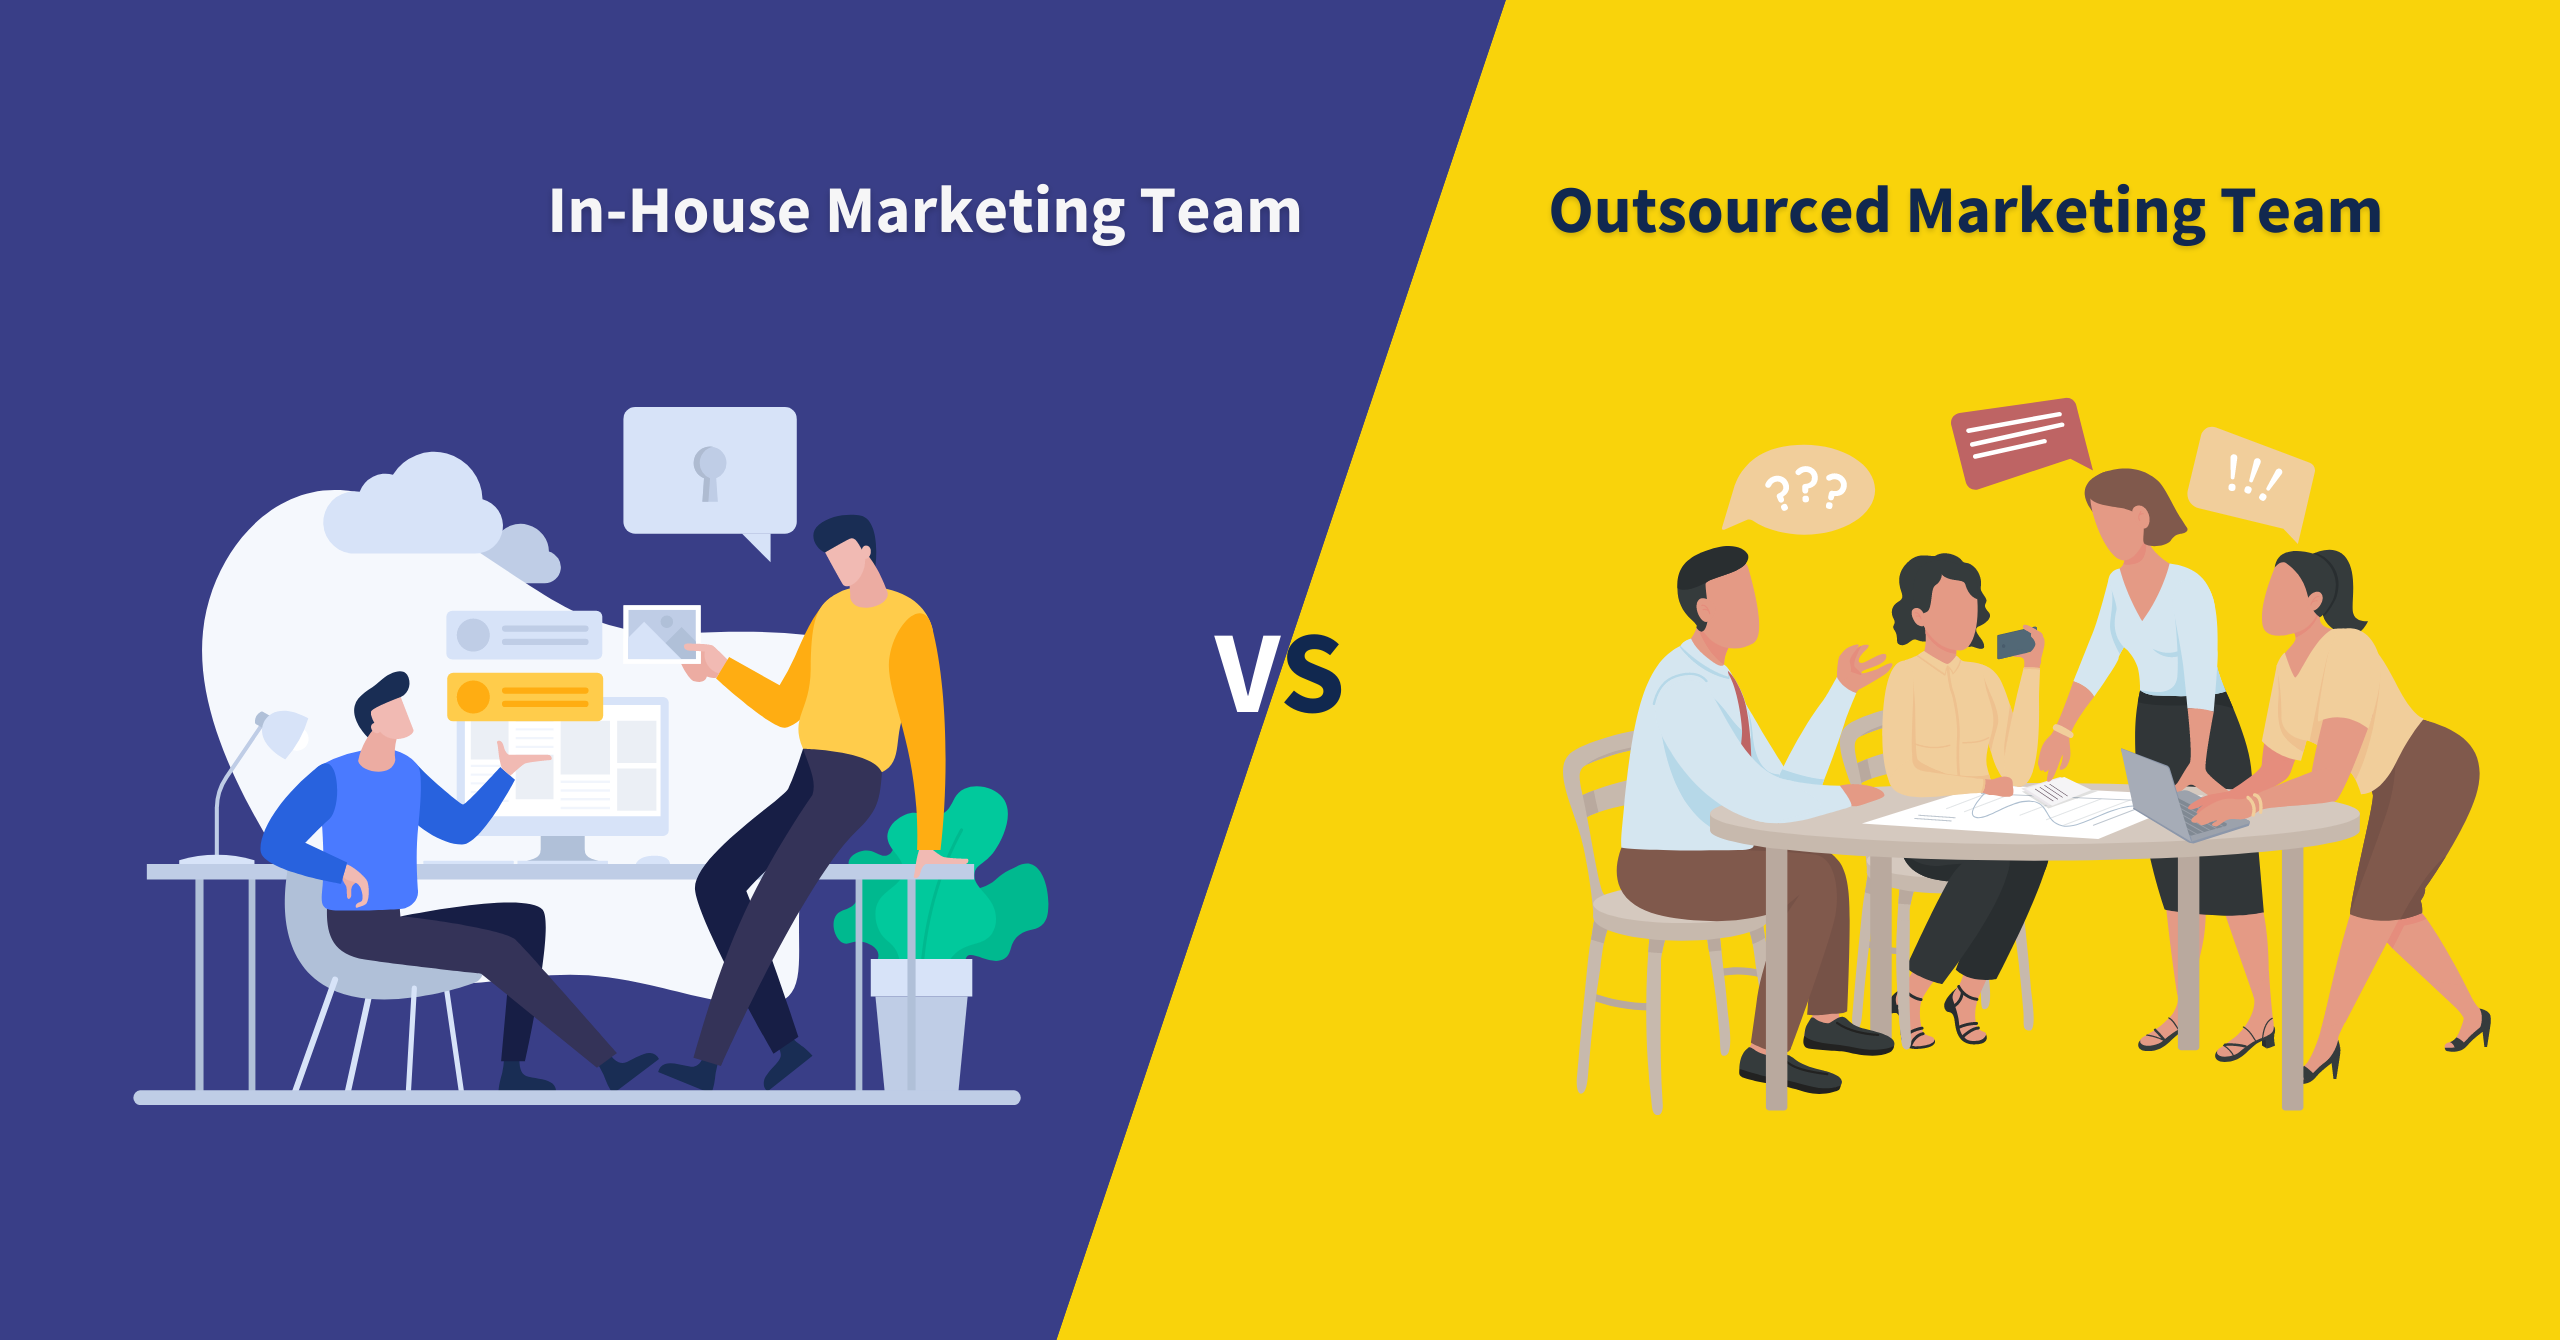 In-House Marketing Team vs. Outsourced Marketing Team